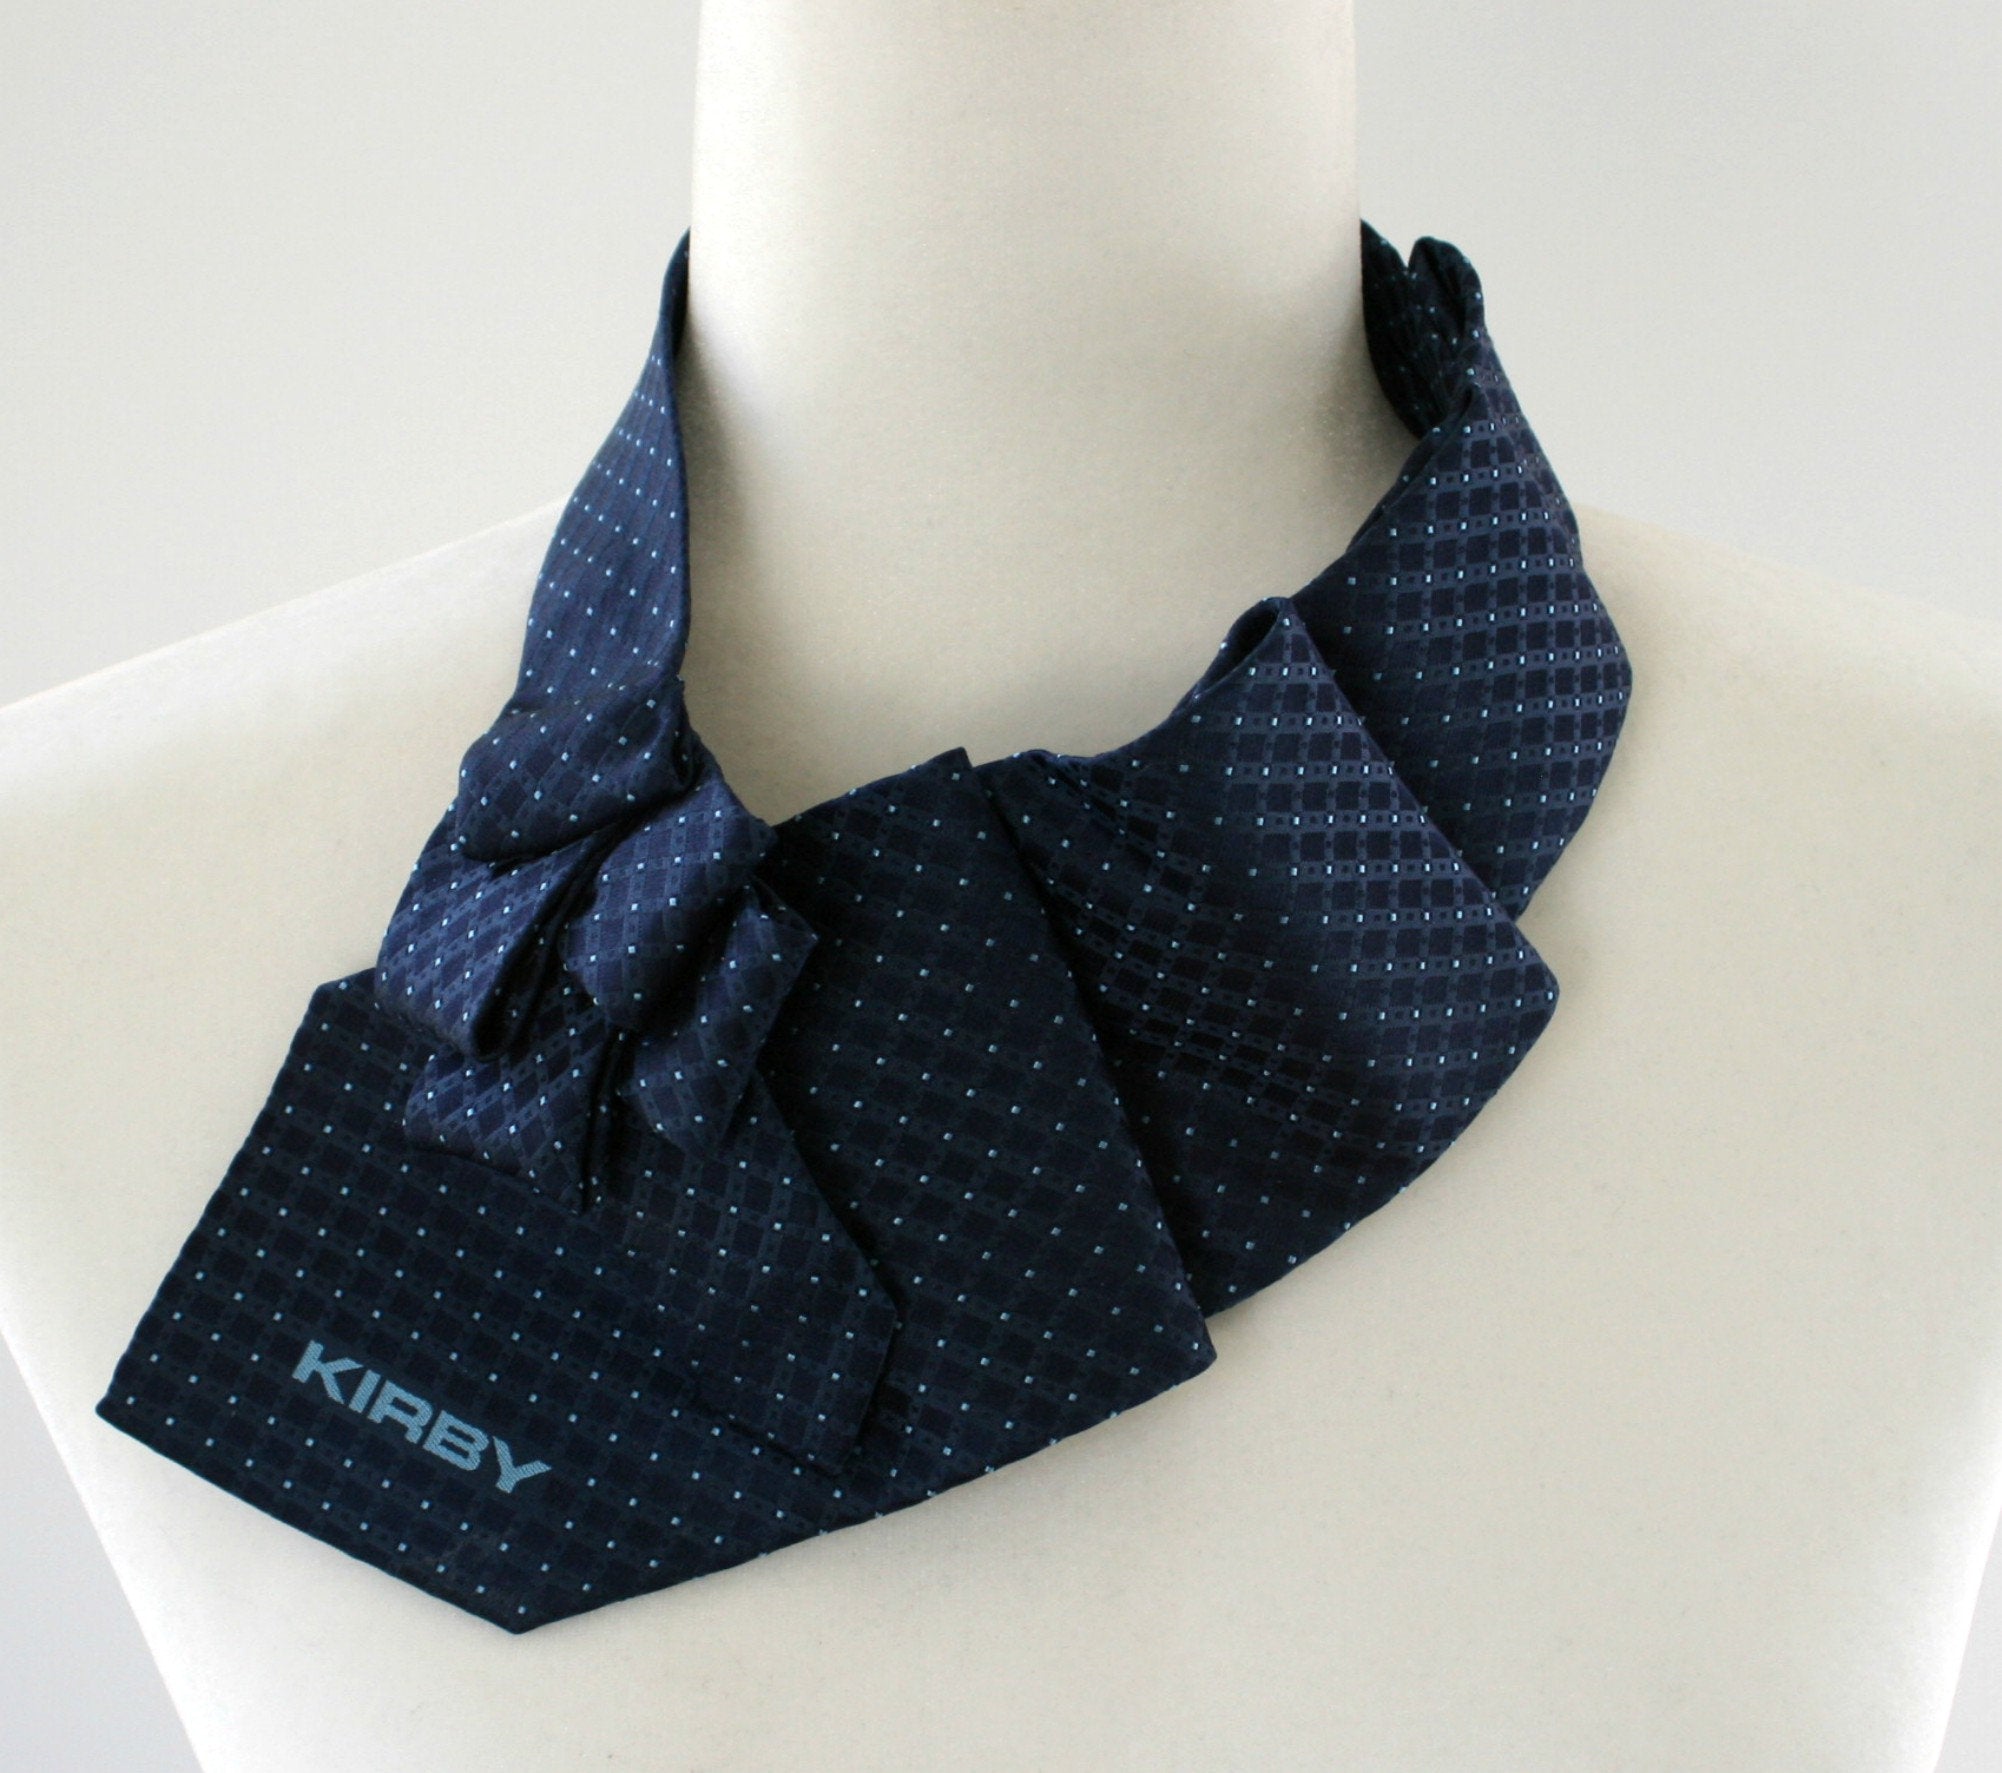 Women's Ascot Scarf In Navy Blue With A Polka Dot Print.